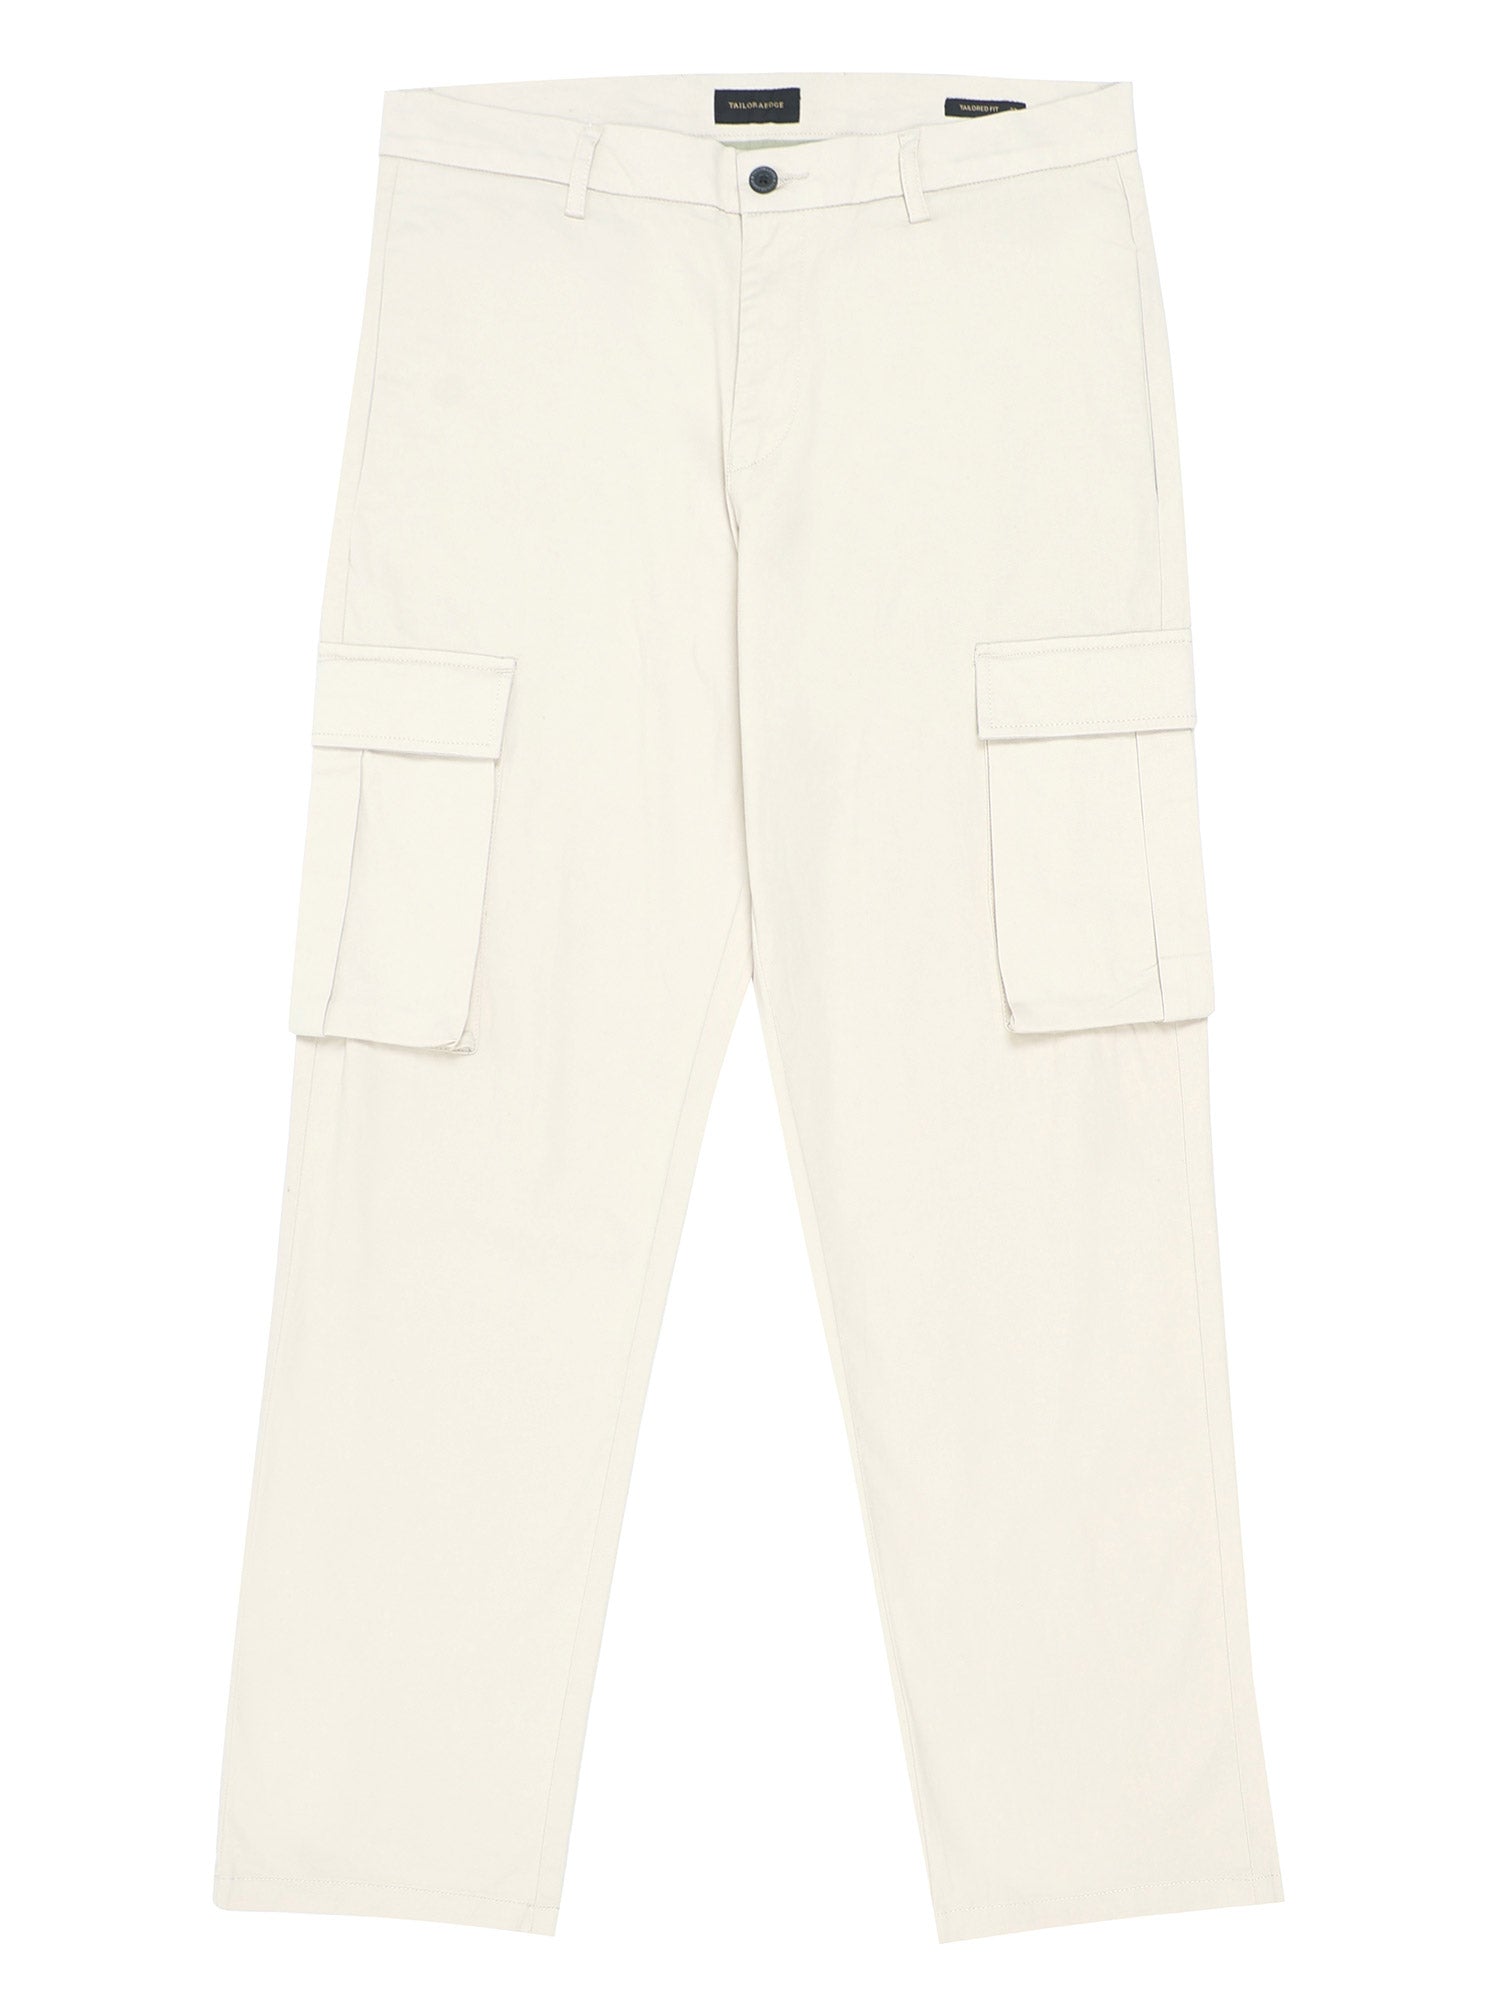 Buy White Baggy Fit Chinos Cotton Cargo Pants Online | Tistabene - Tistabene